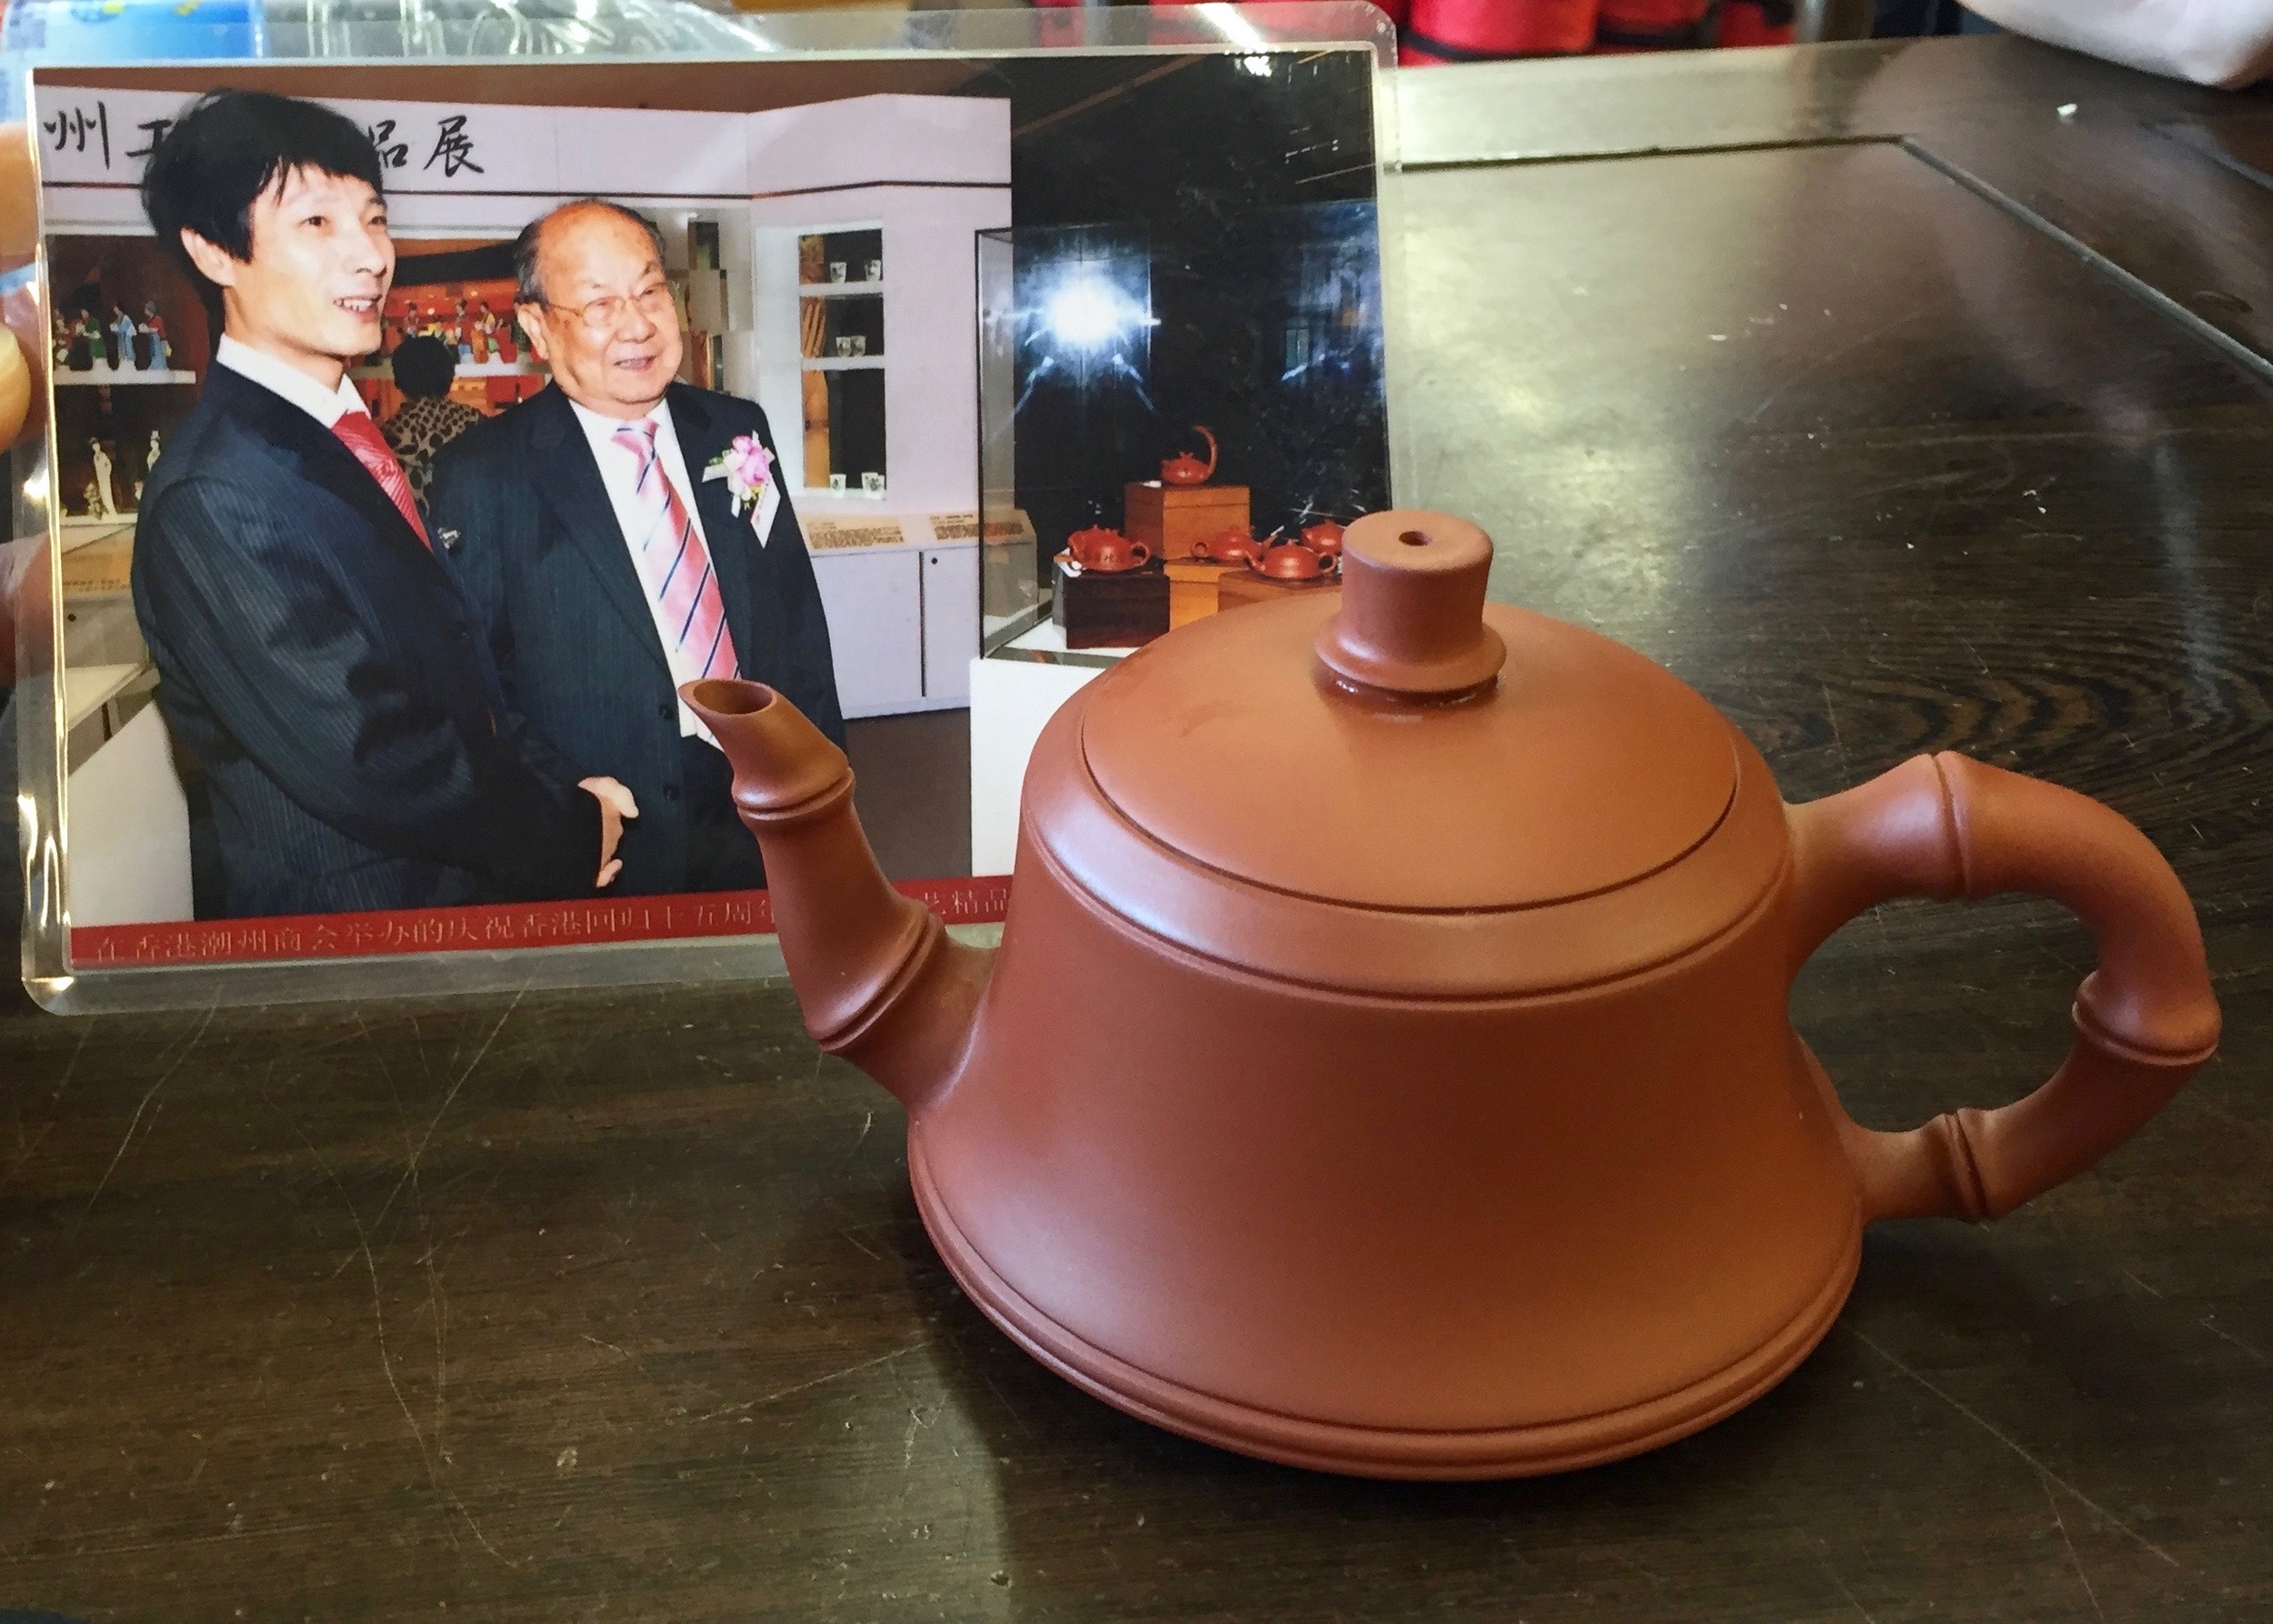  Here is the teapot I purchased. &nbsp;The artist is the man on the left.&nbsp; 